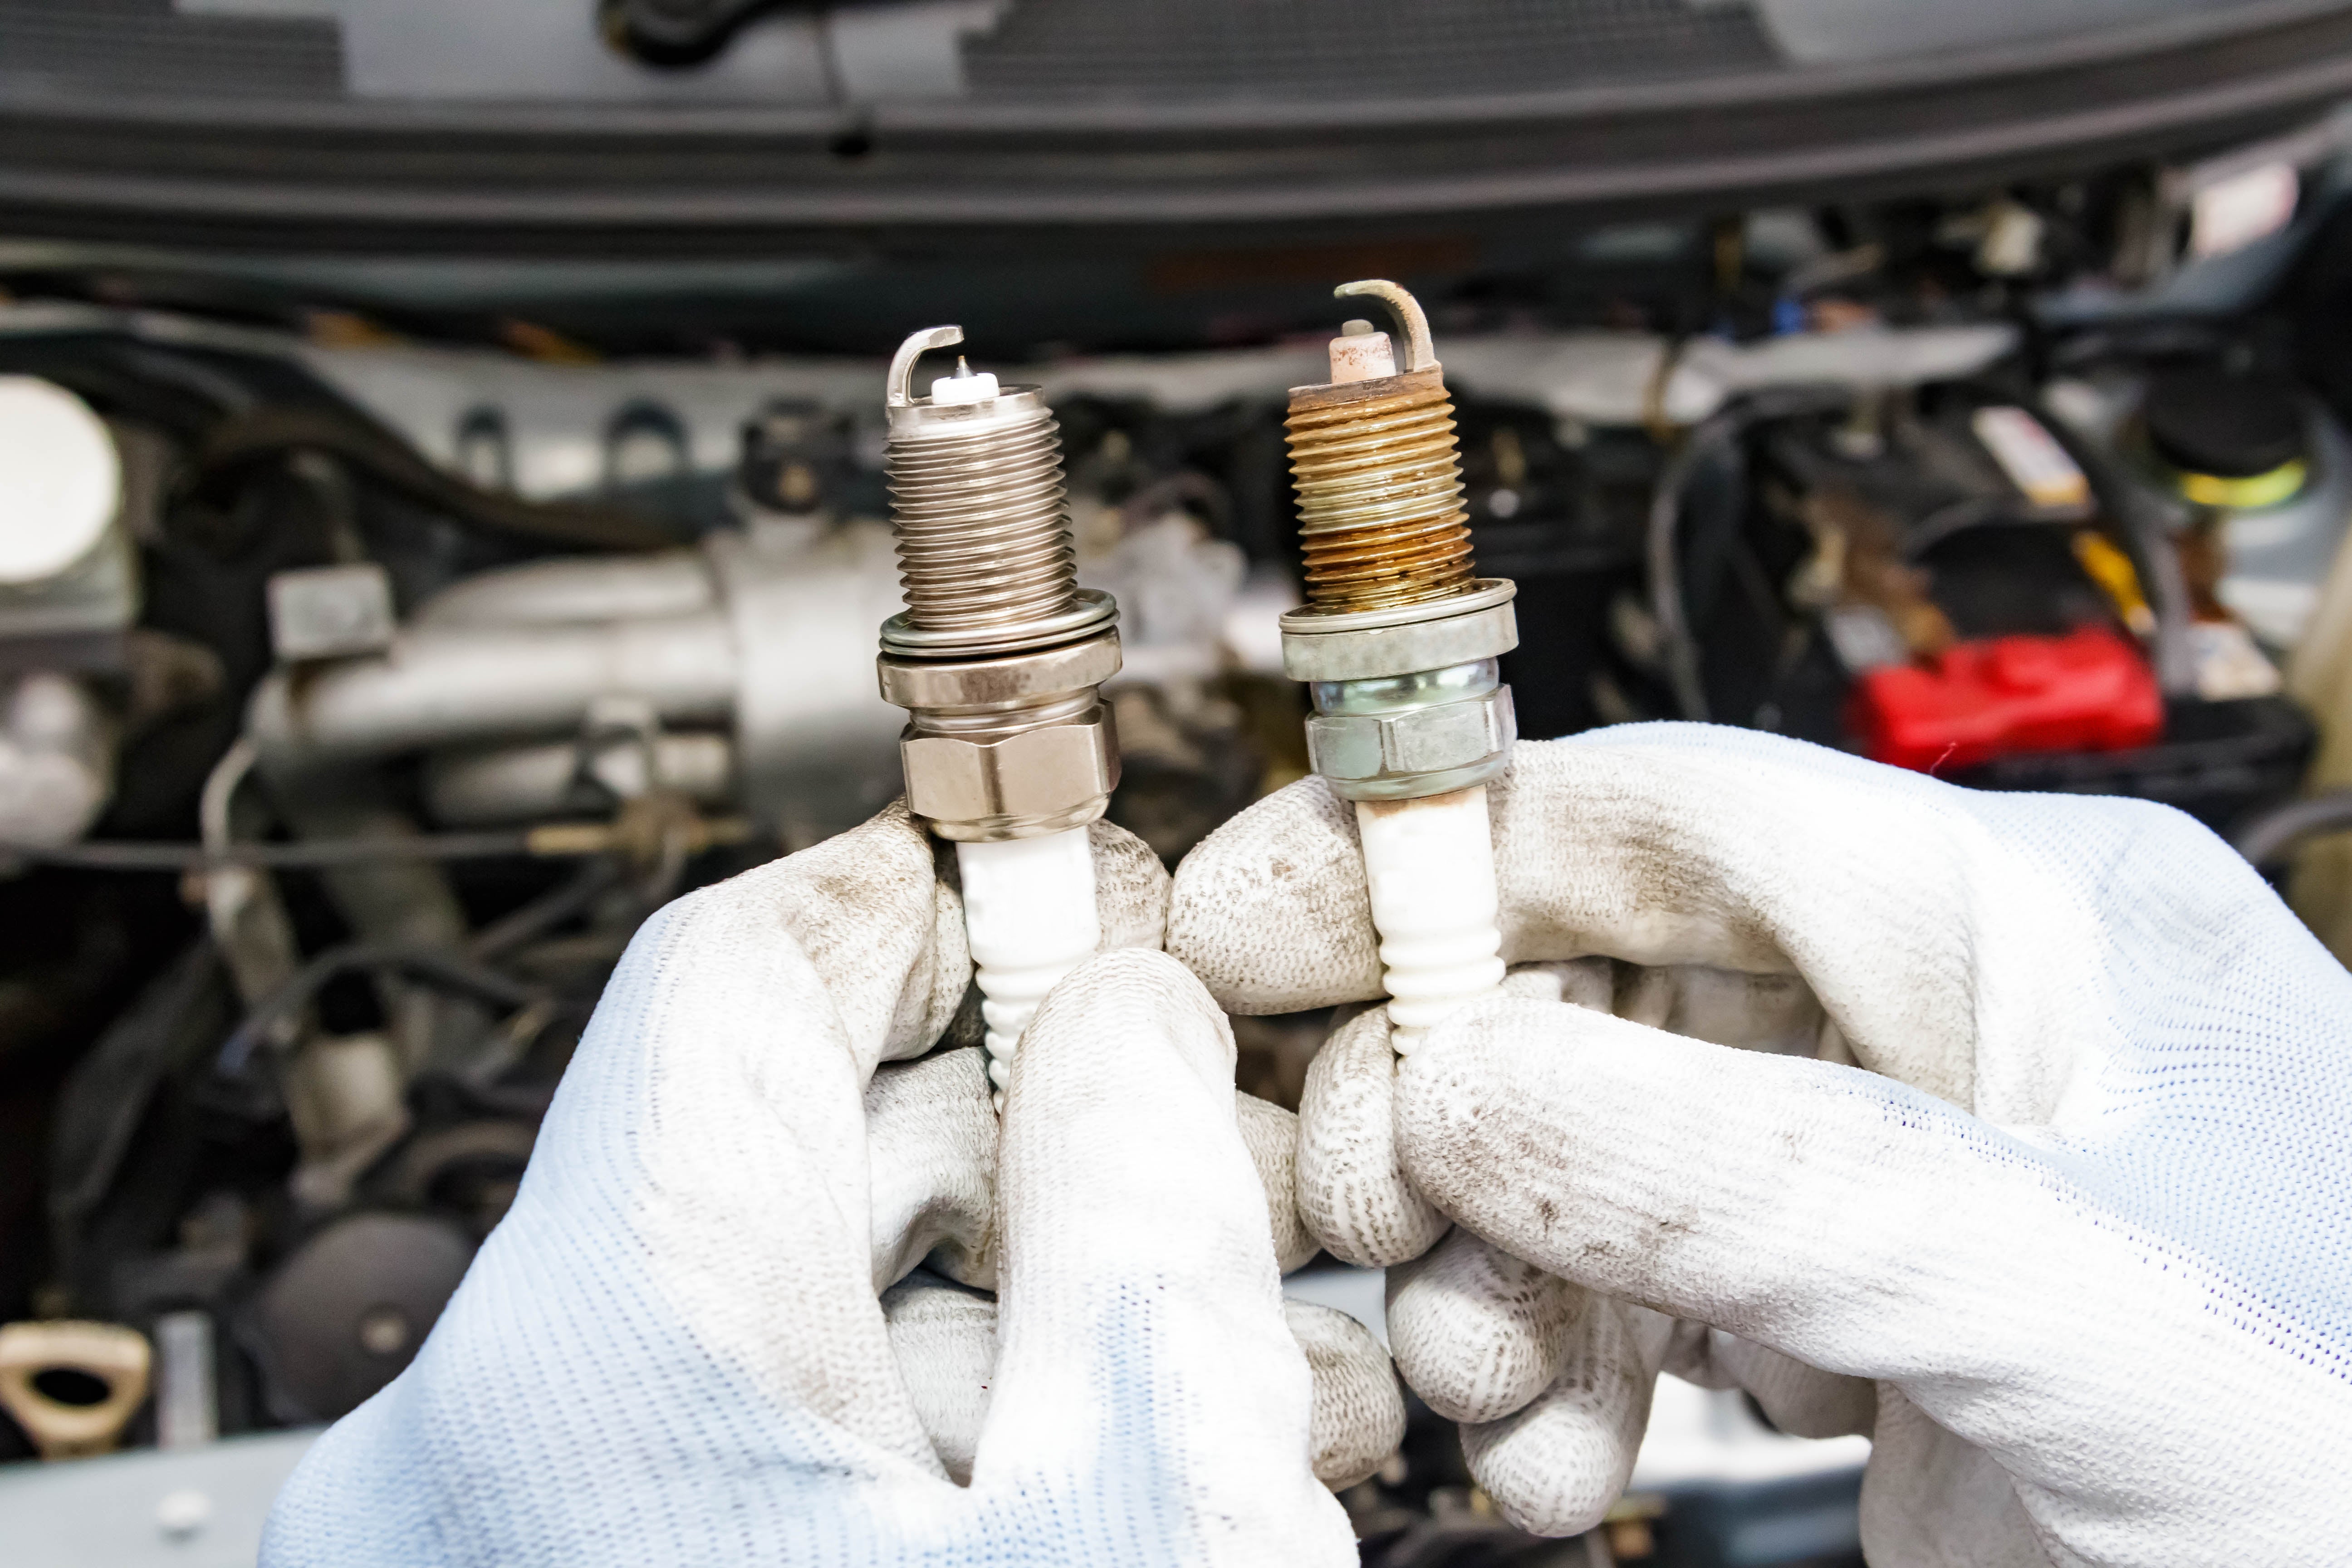 Spark plug replacement